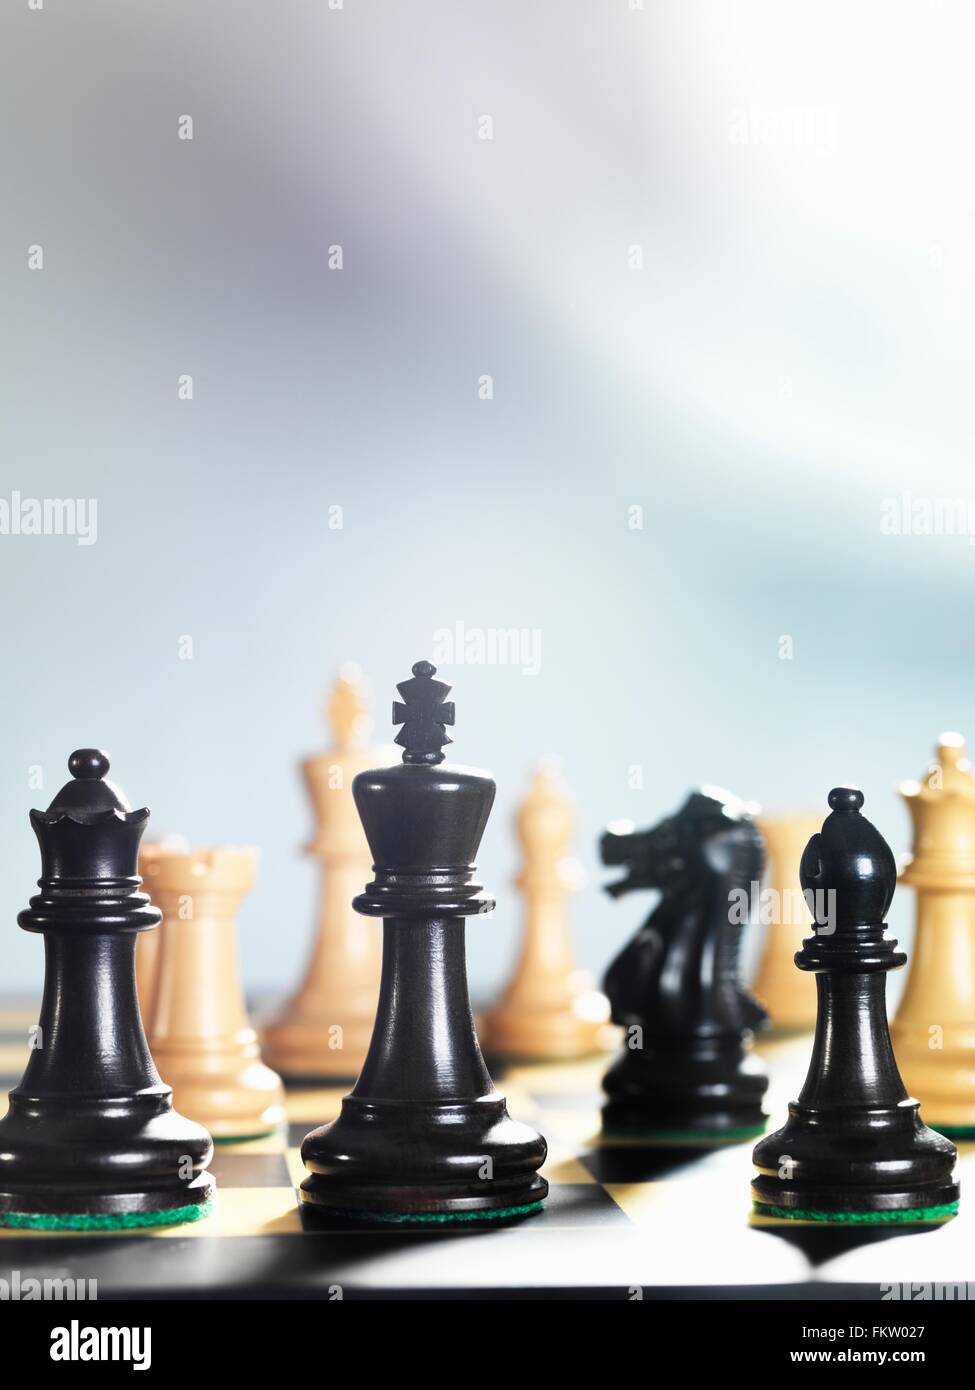 Checkmate Strategy Closeup Of Chess Player Thinking About Next Move Stock  Photo - Download Image Now - iStock